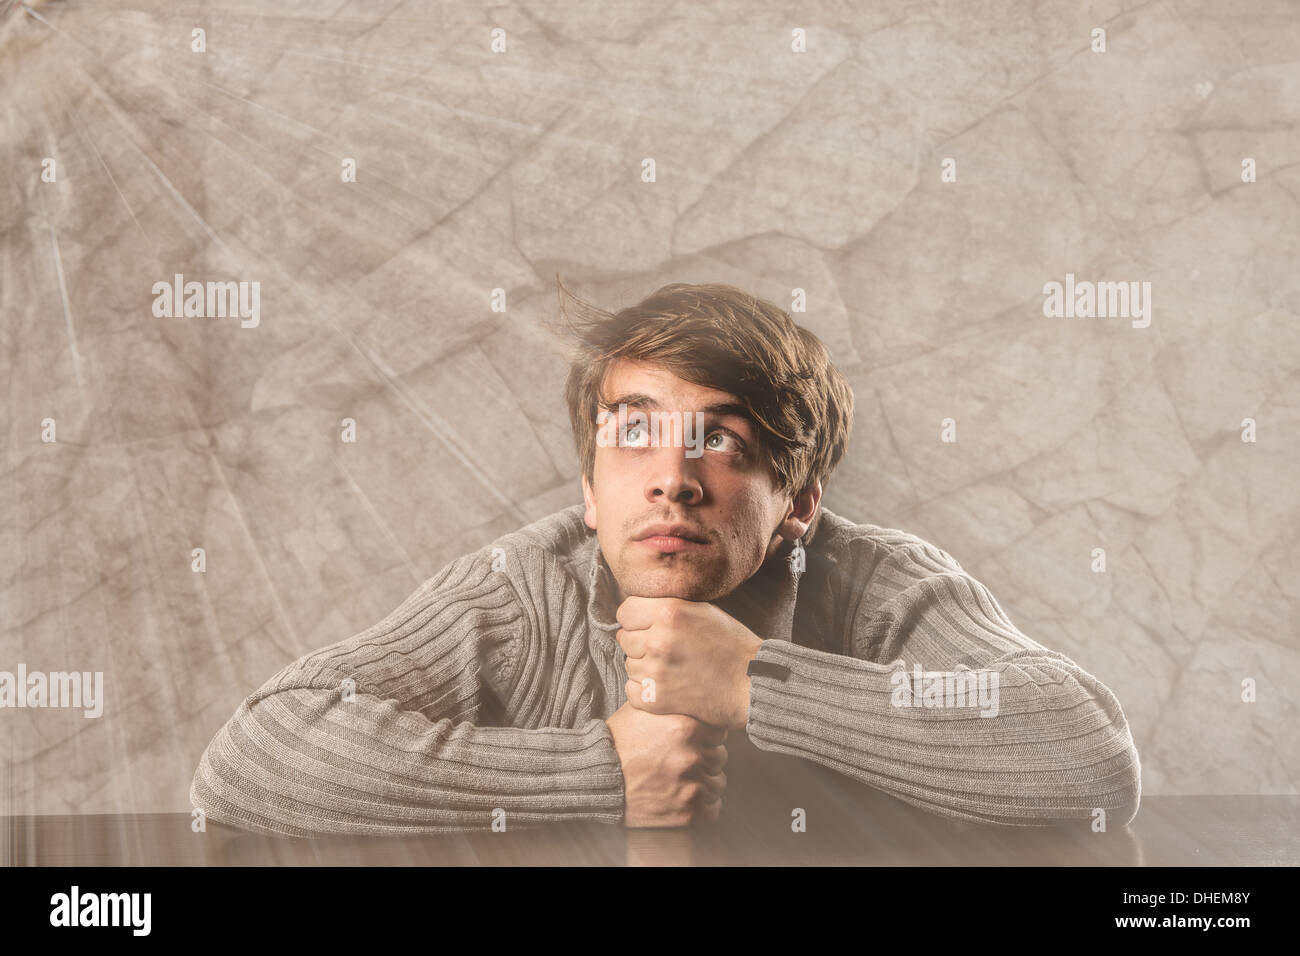 Pensive young man in gray pullover over gray background Stock Photo